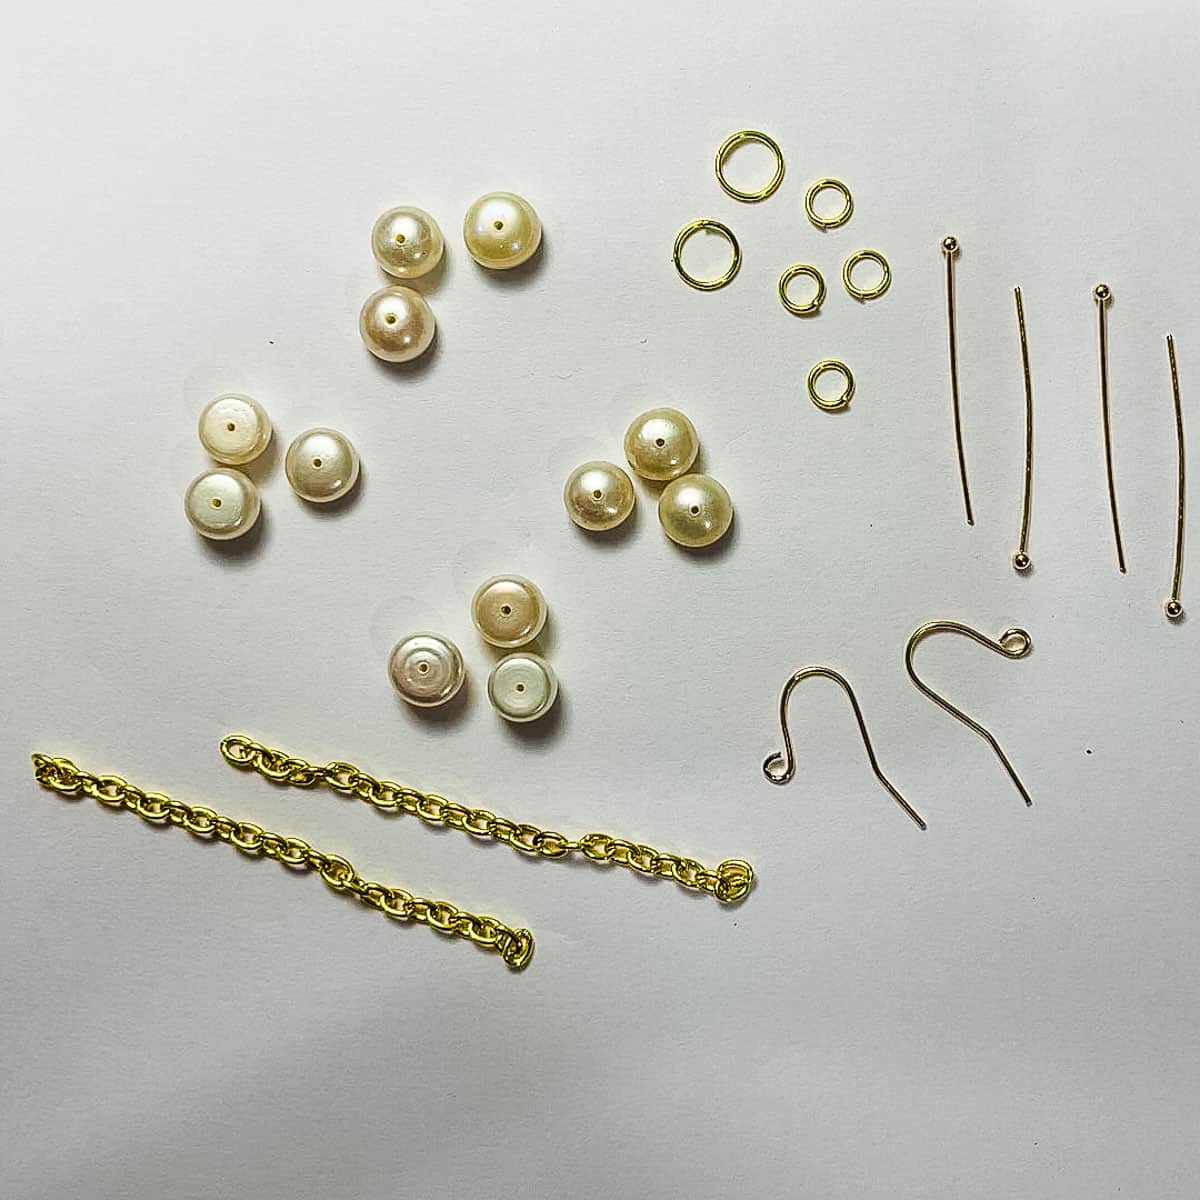 Freshwater pearls, headpins, jump rings, earring hooks and gold link chains.